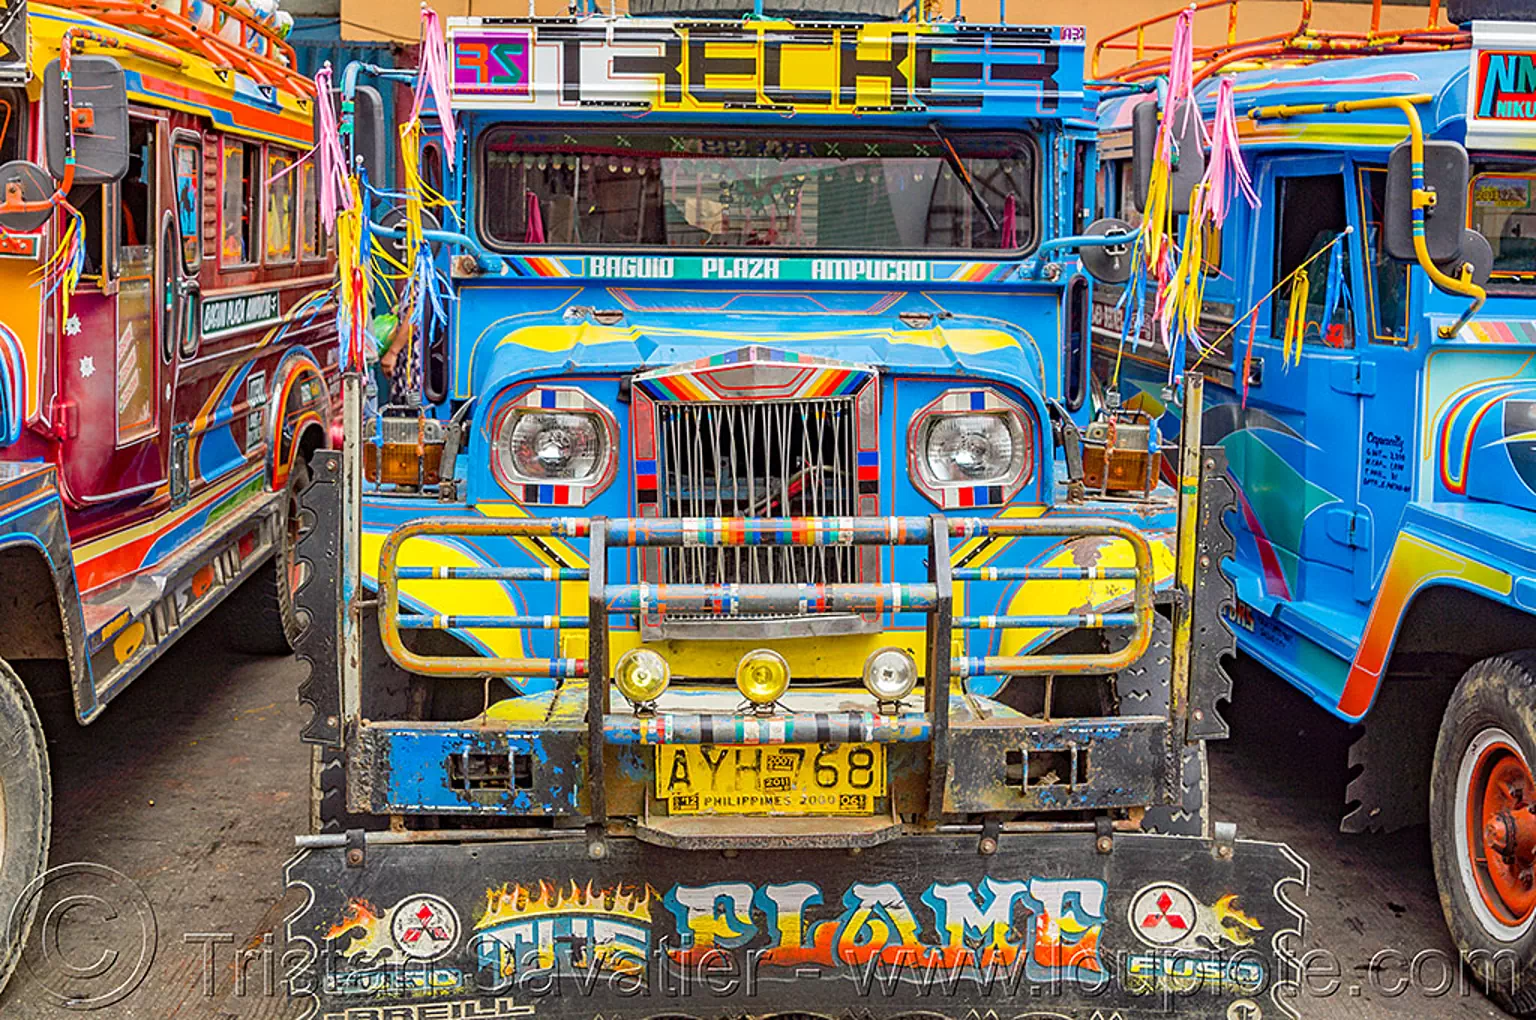 blue jeepney at station(philippines), baguio, colorful, decorated, front grill, jeepney, painted, philippines, truck